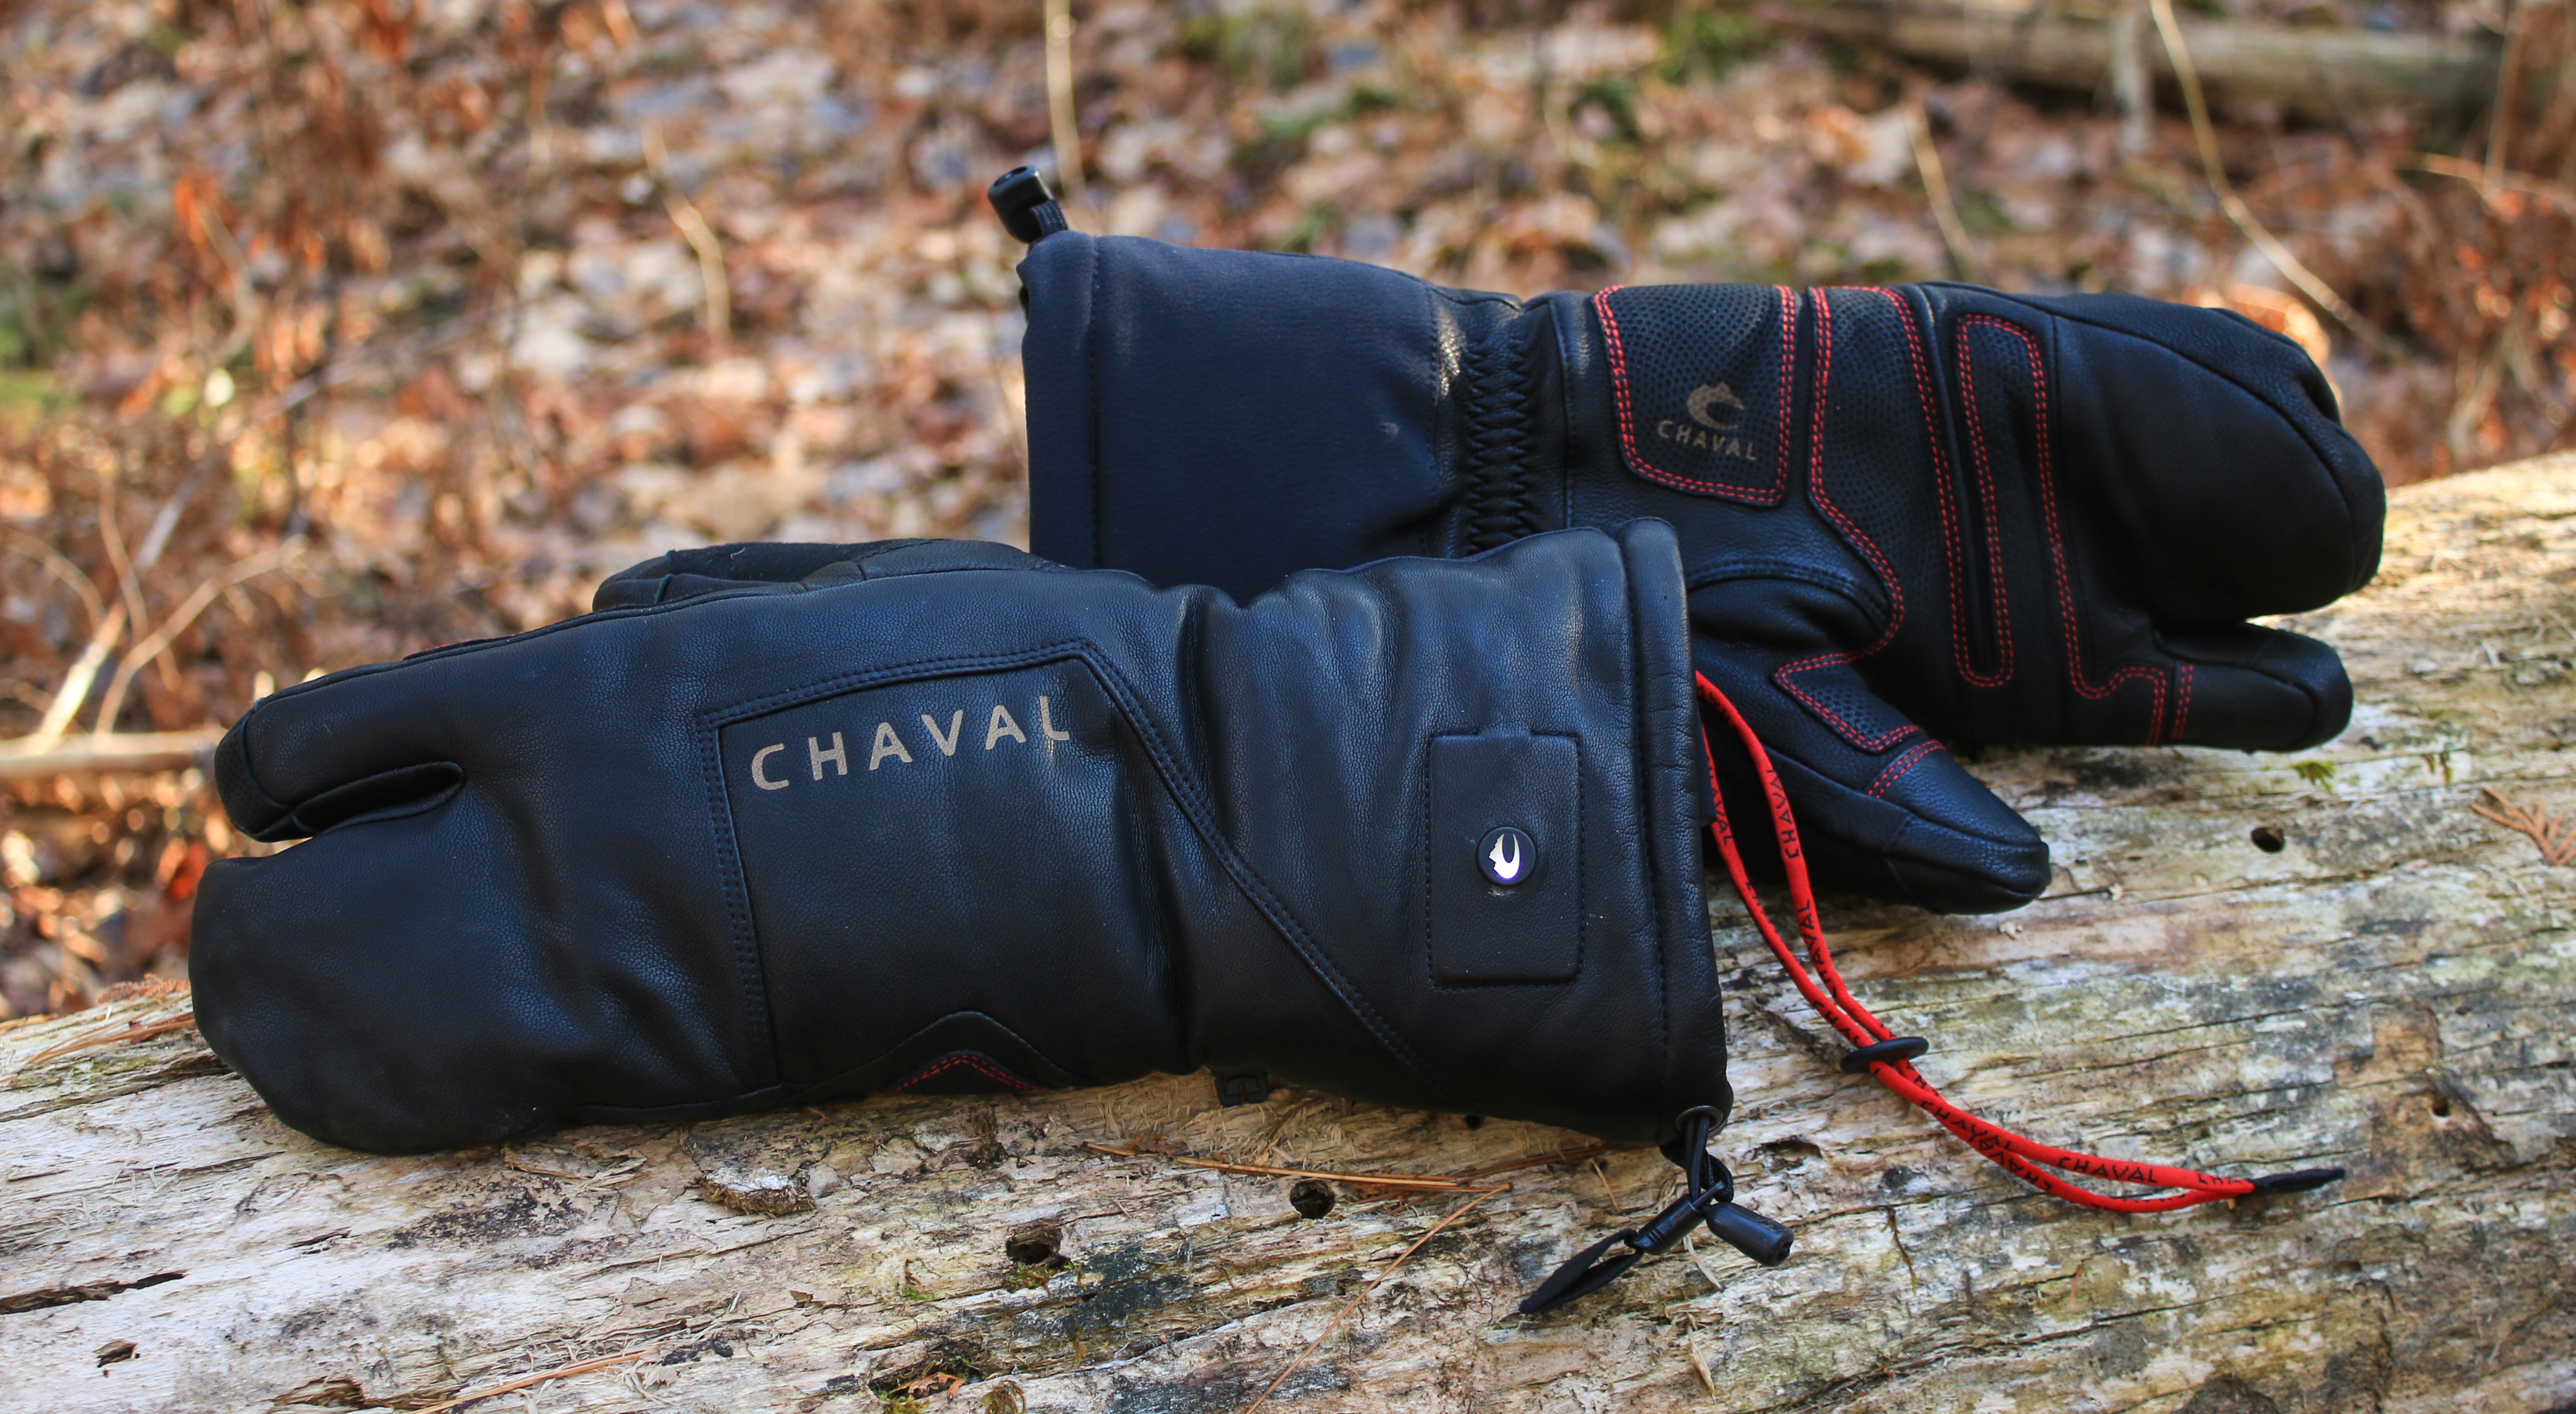 Chaval Heated Gloves